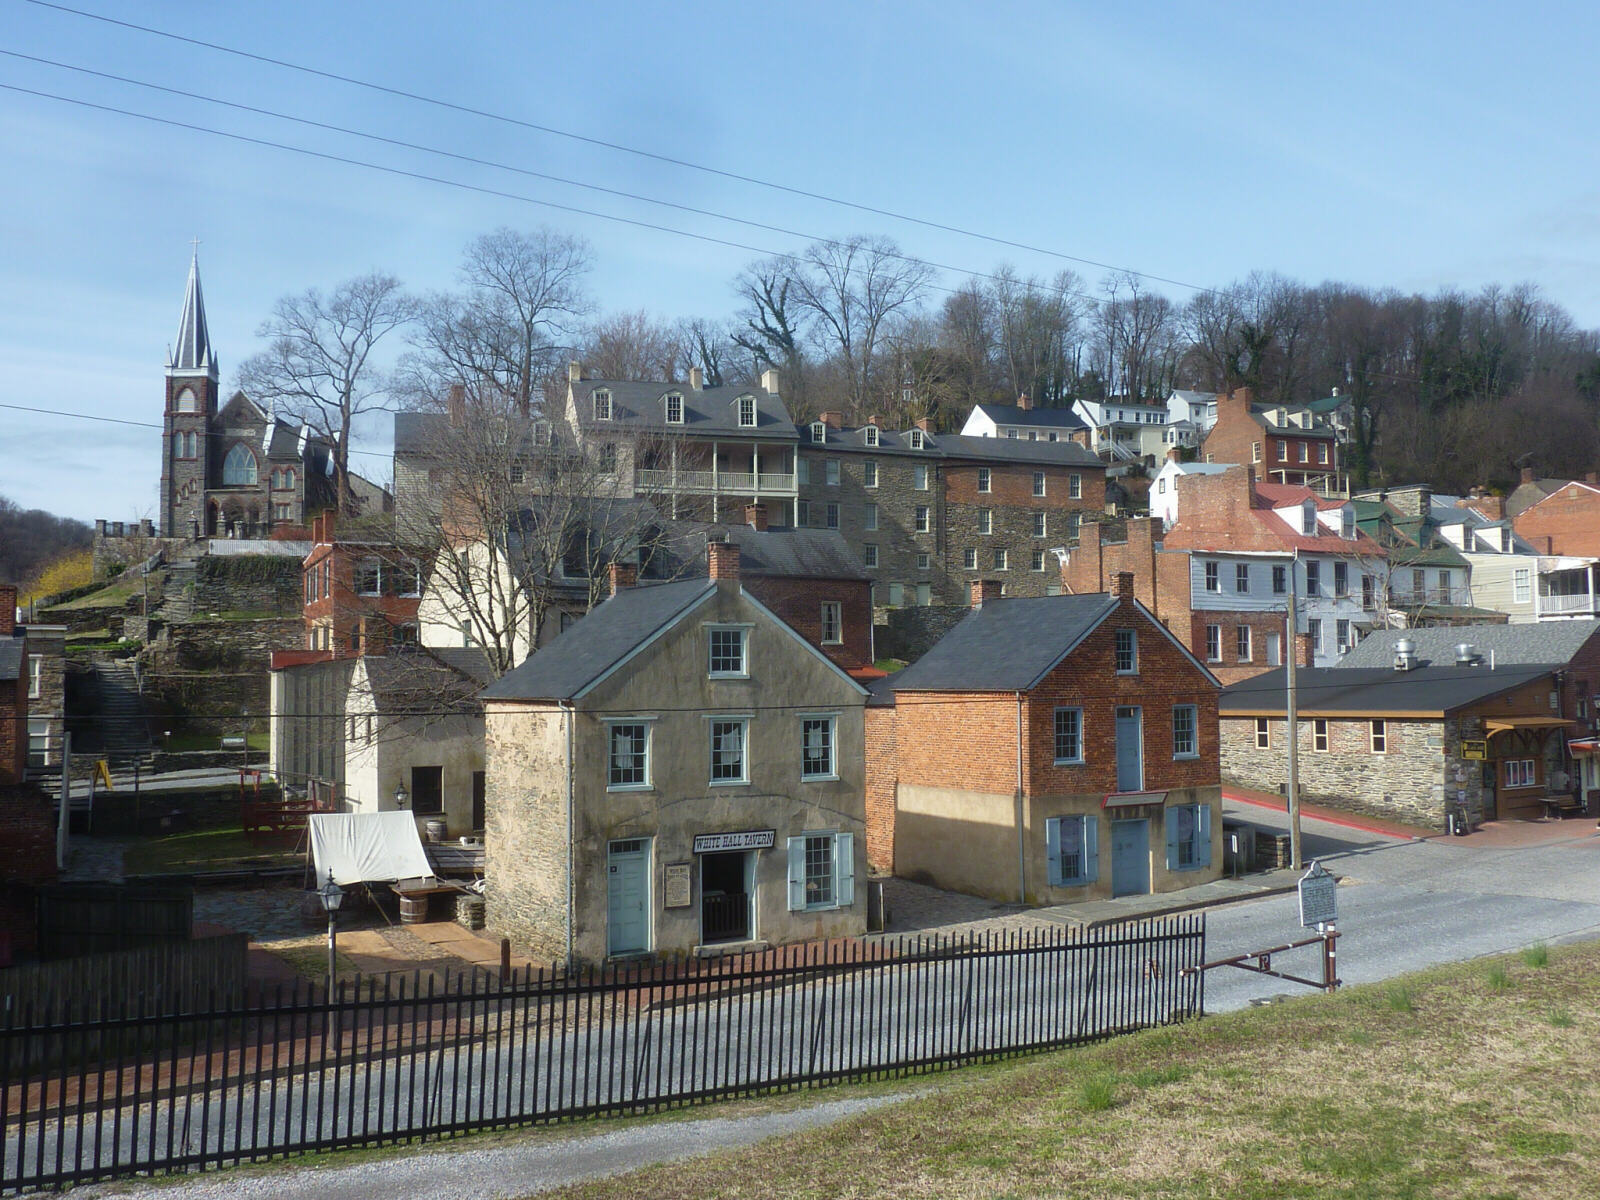 Harpers Ferry from the Amtrak station